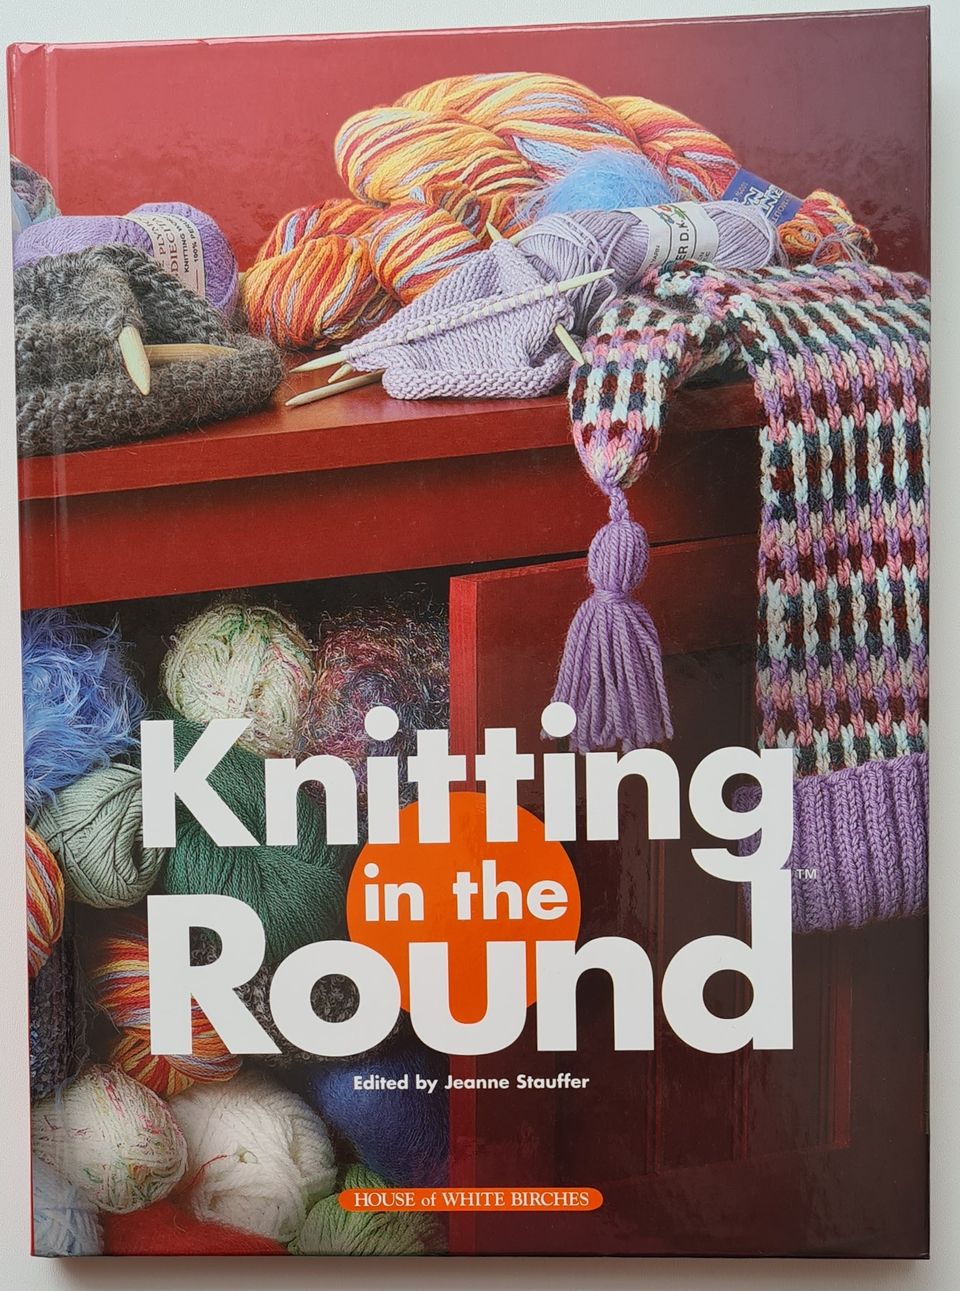 Knitting in the round